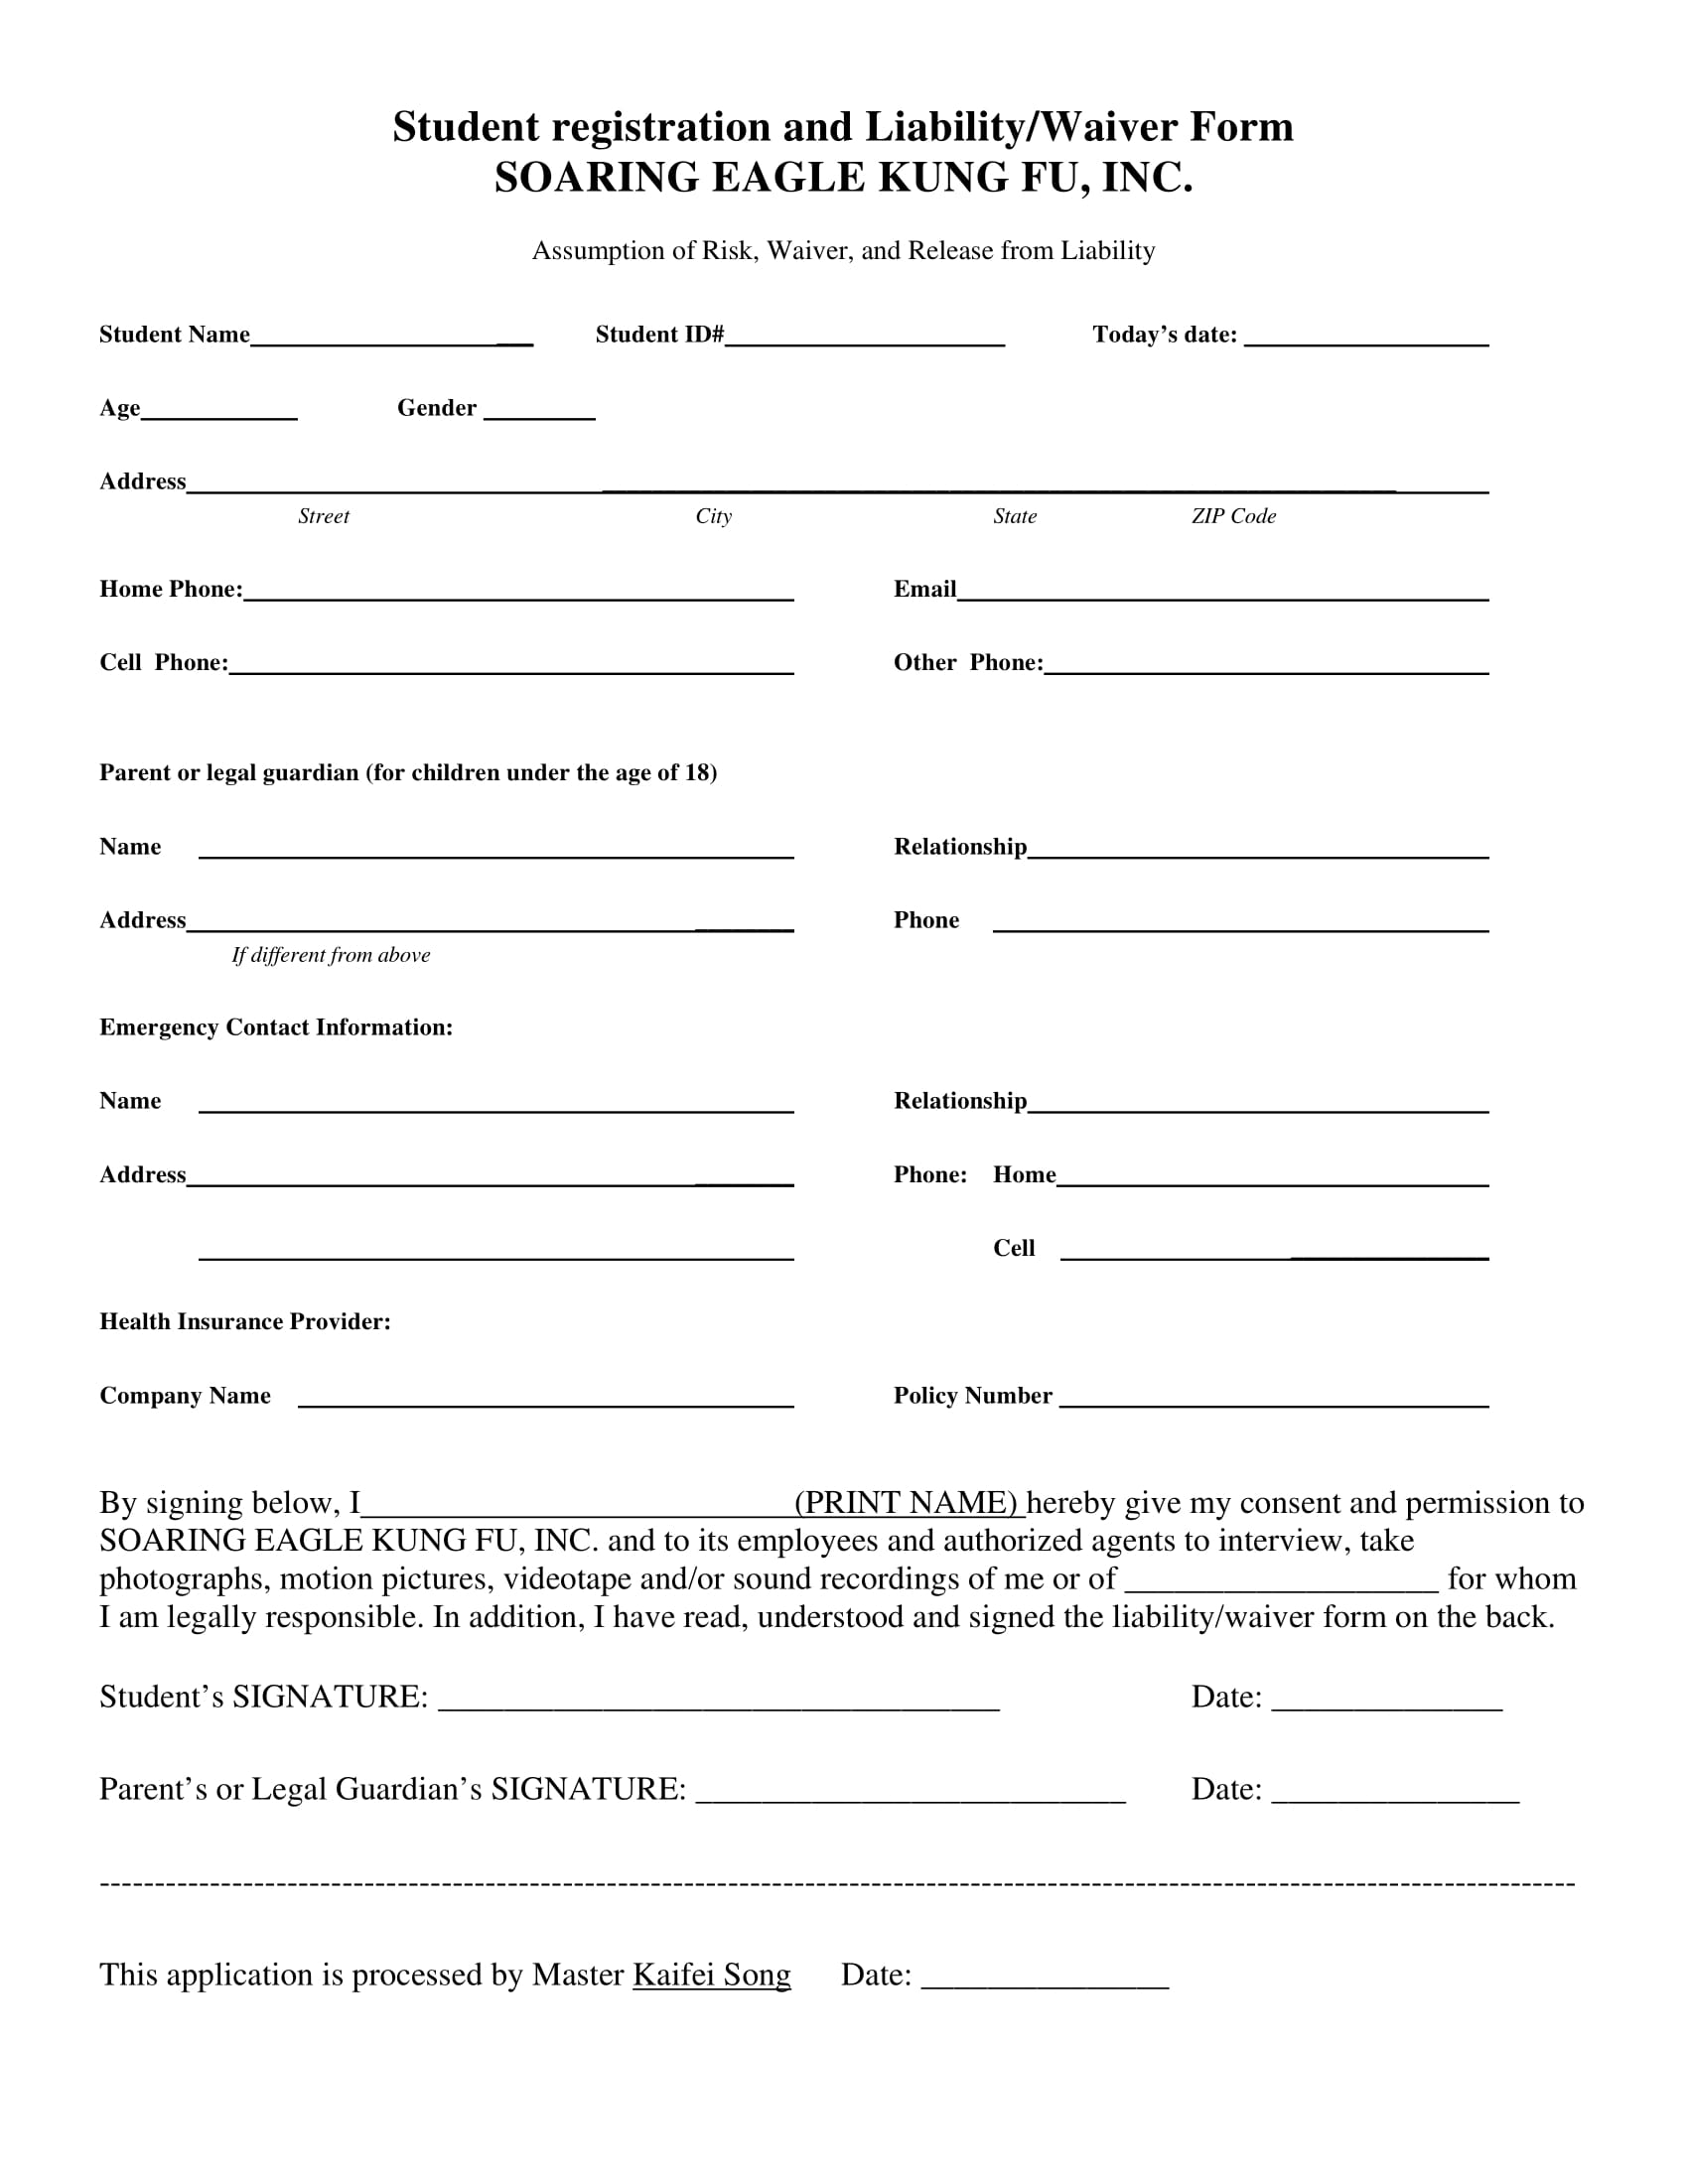 student liability or waiver form 1